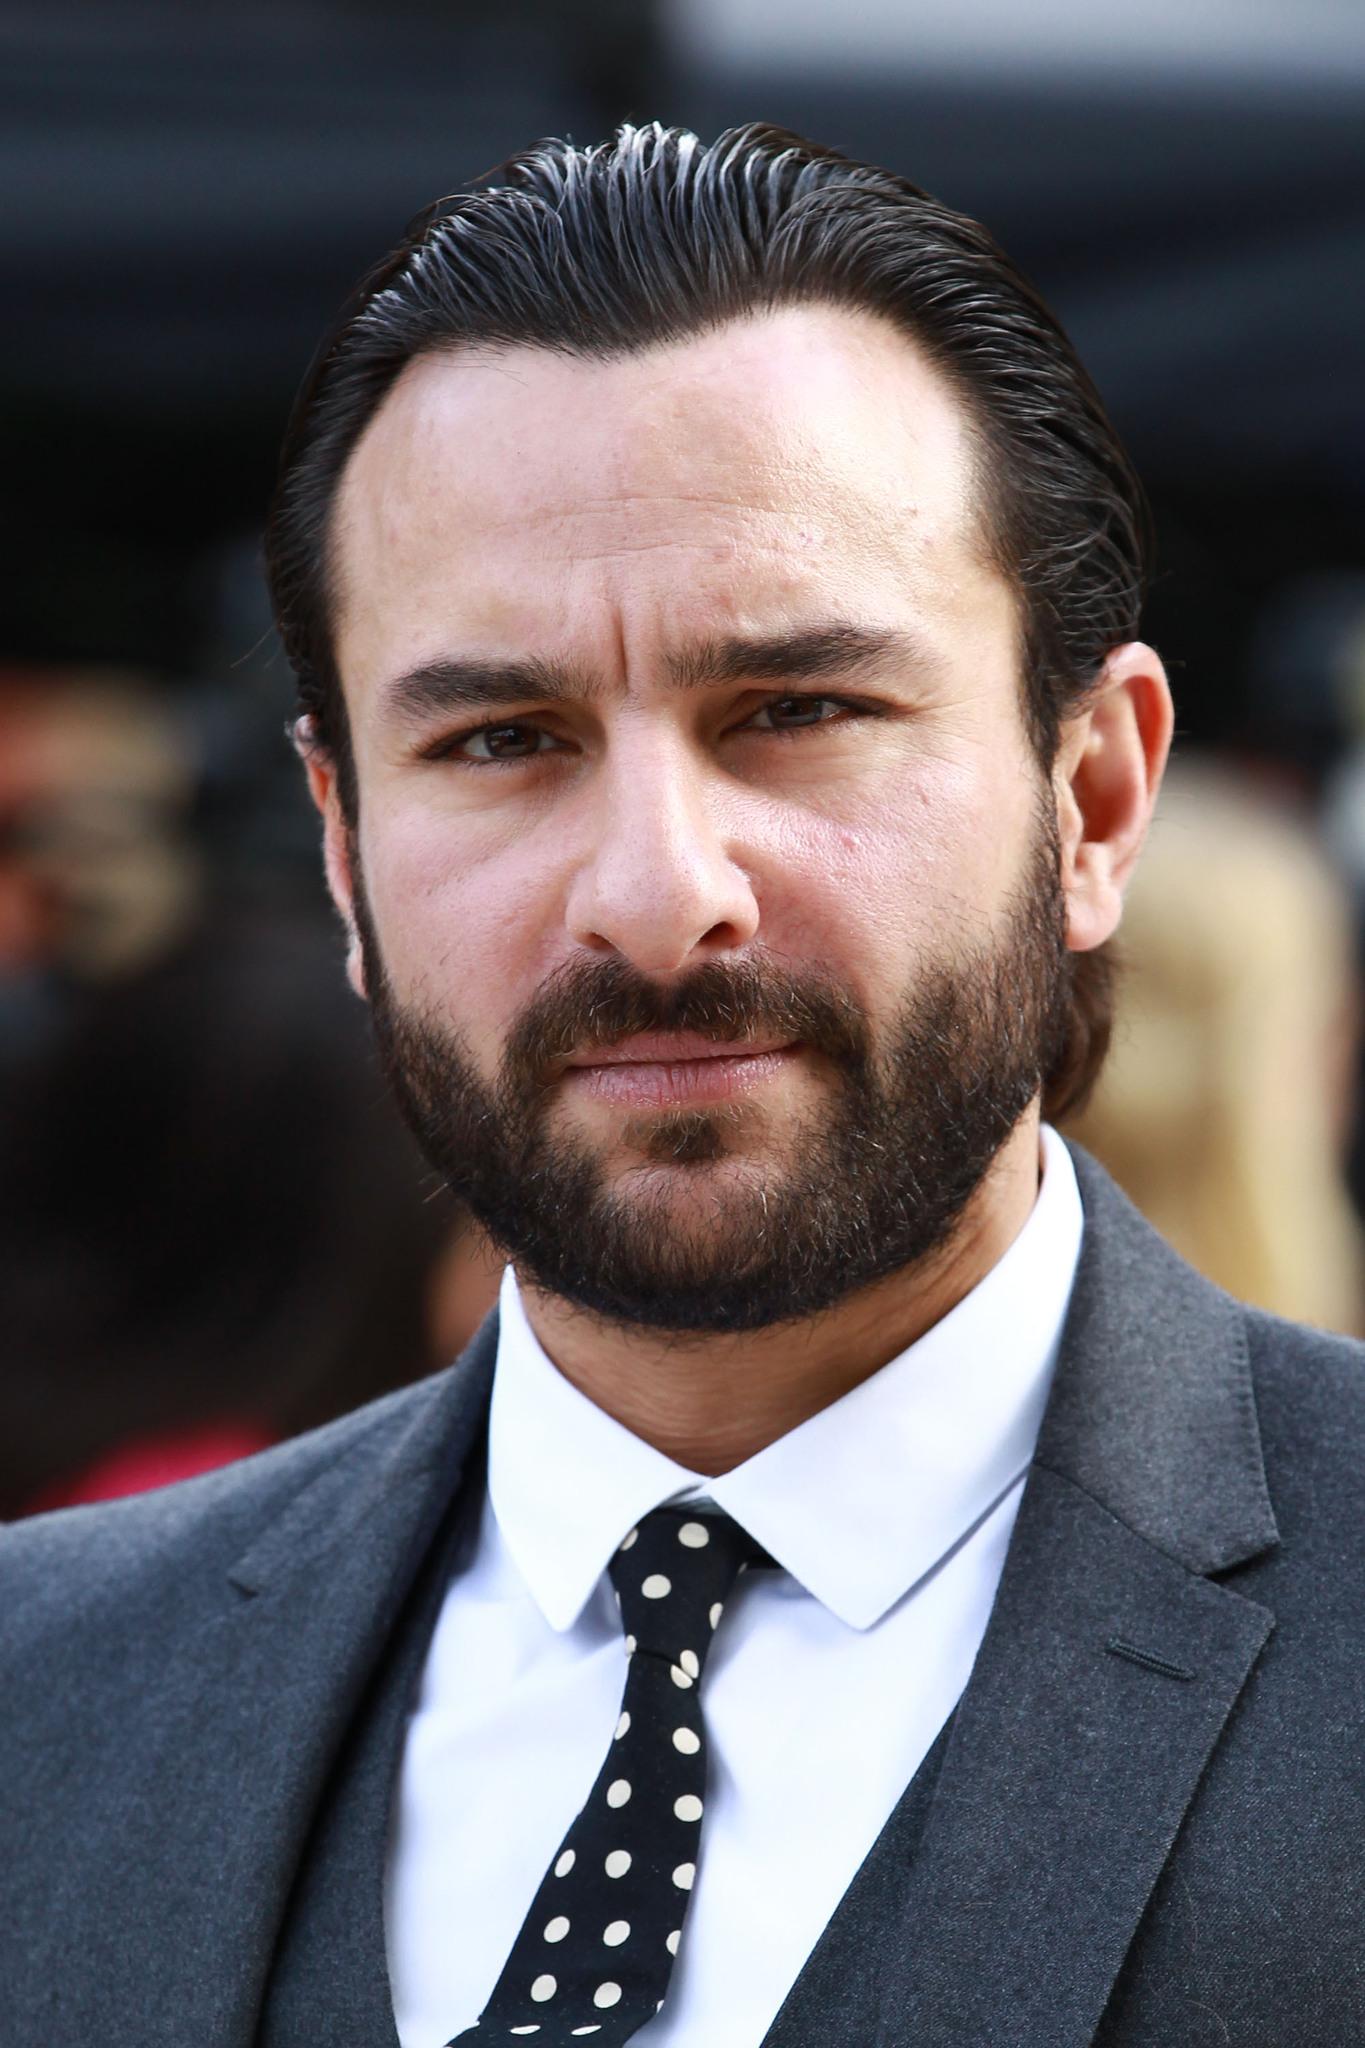 2nd GenerationEldest son of Mansoor and Sharmila Tagore, Saif Ali Khan entered the cinematic stage with 